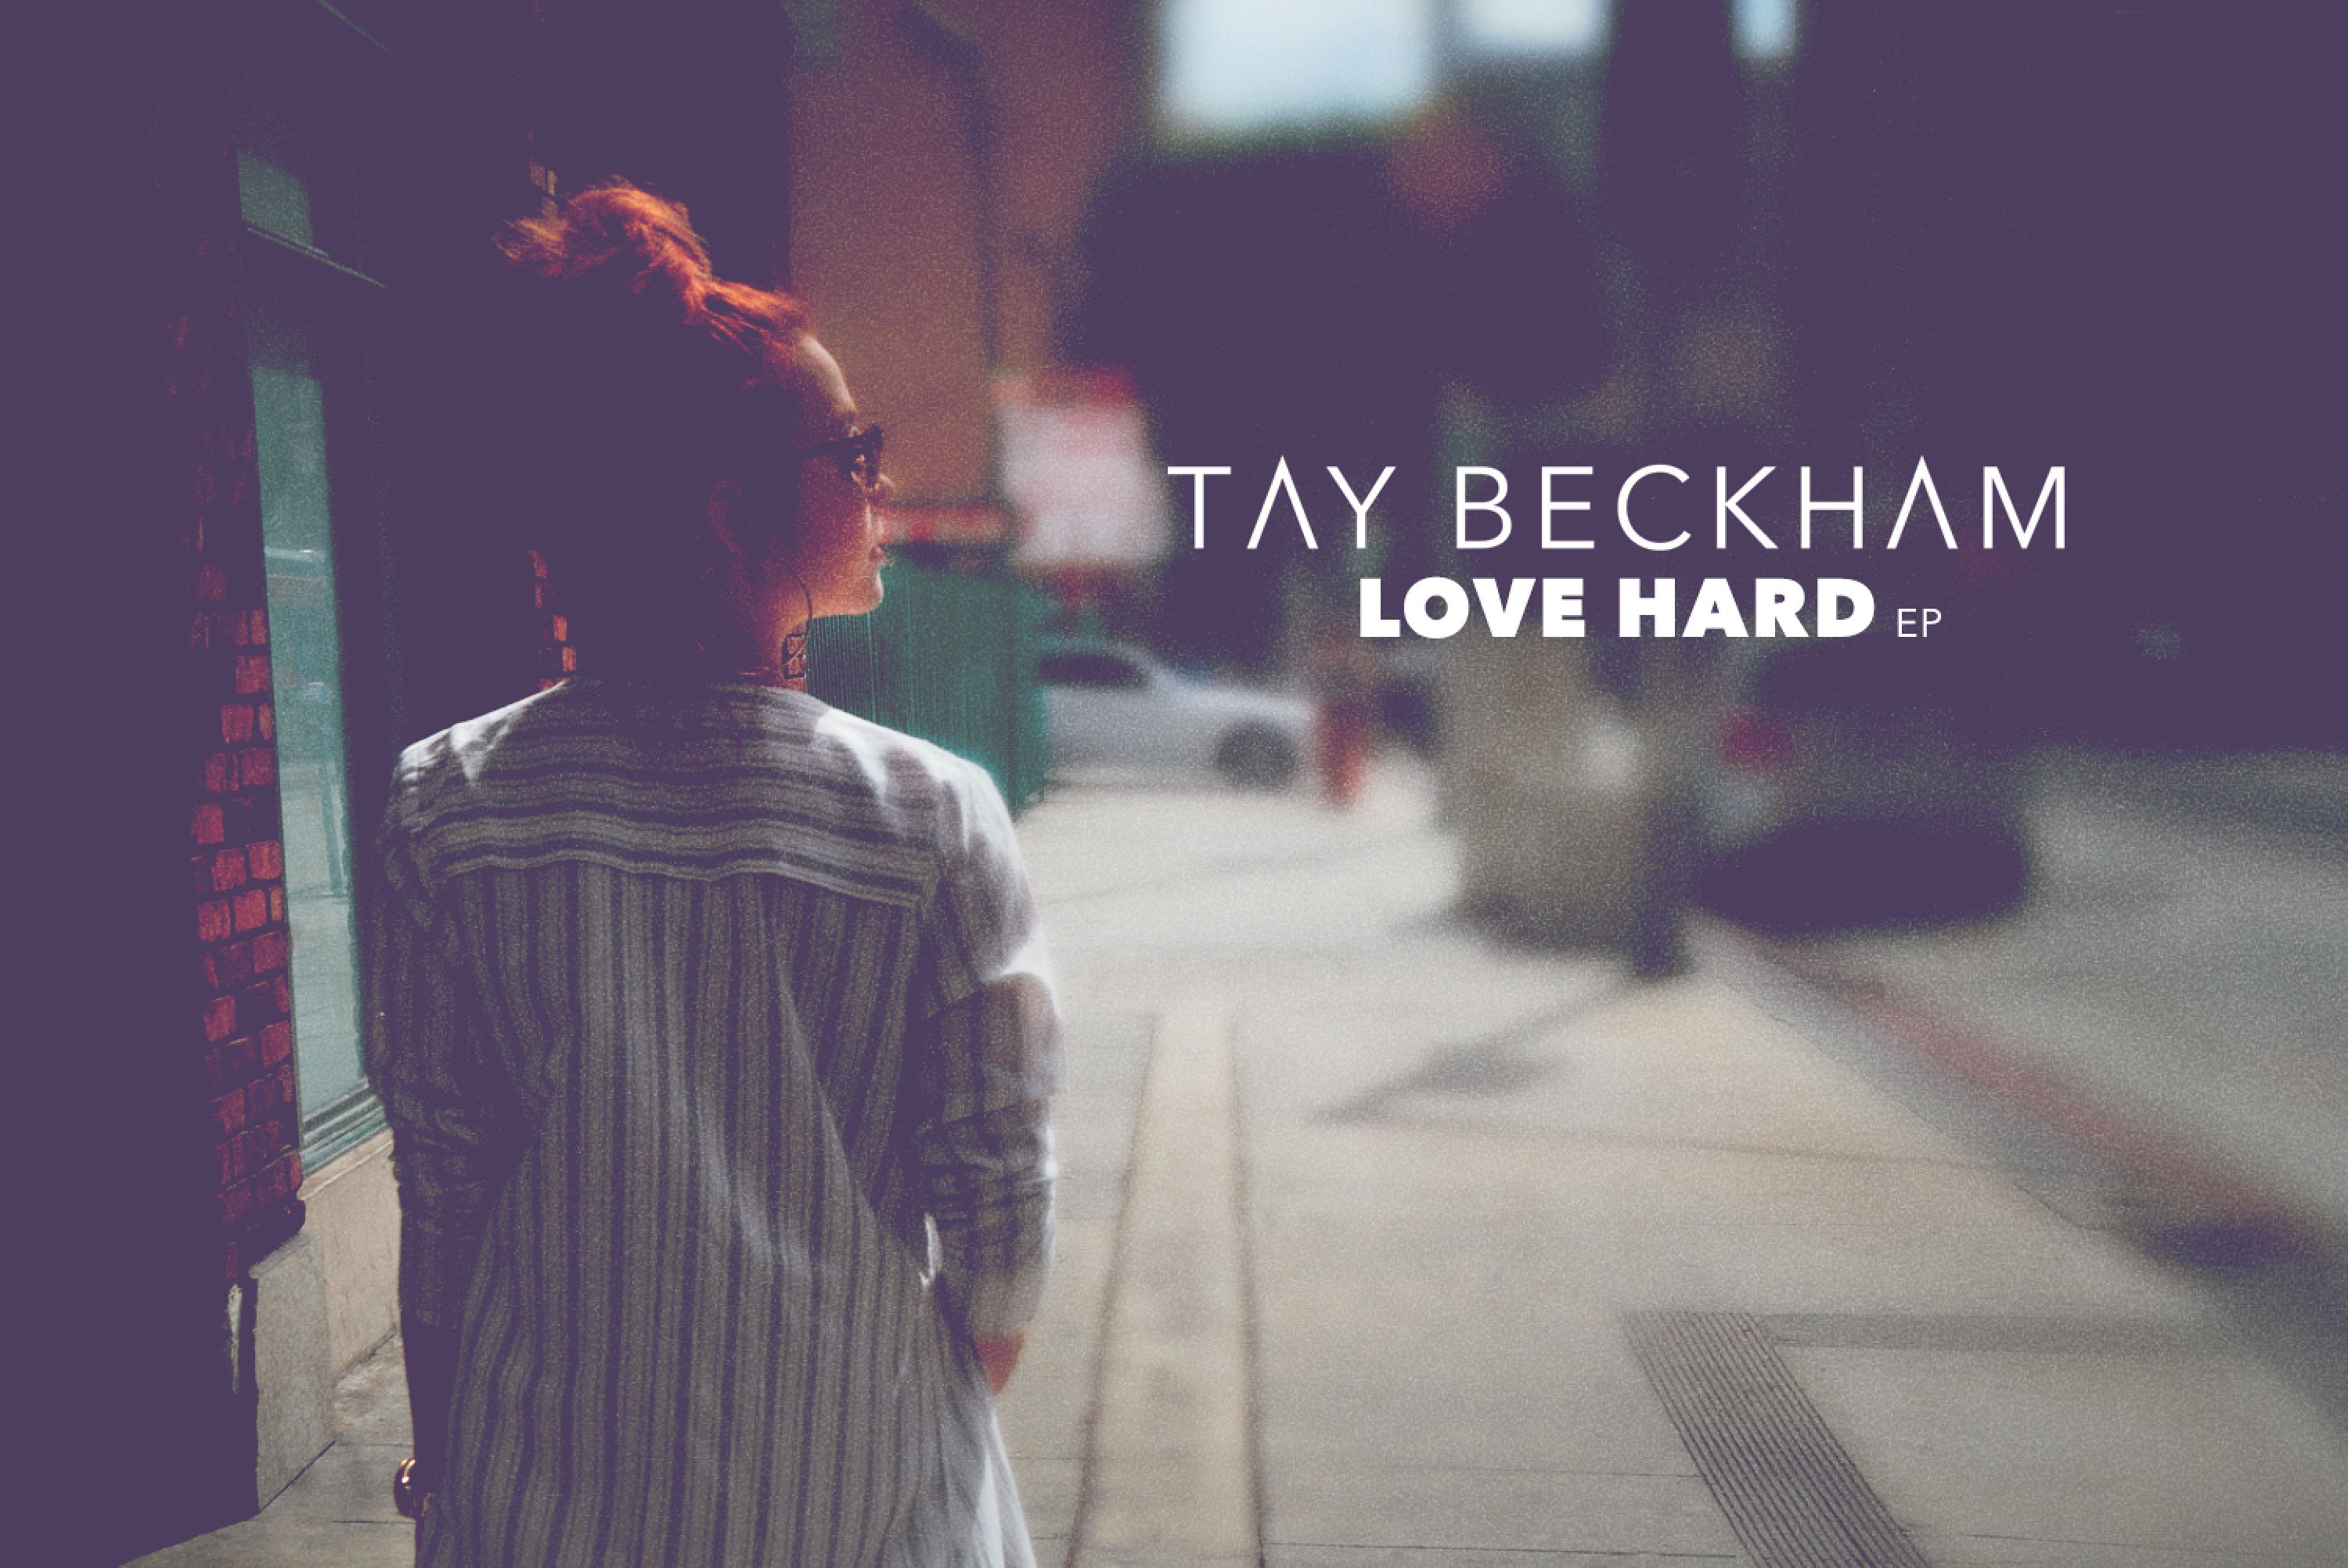 Tay Beckham Releases Debut EP "Love Hard + "Excuses" Video